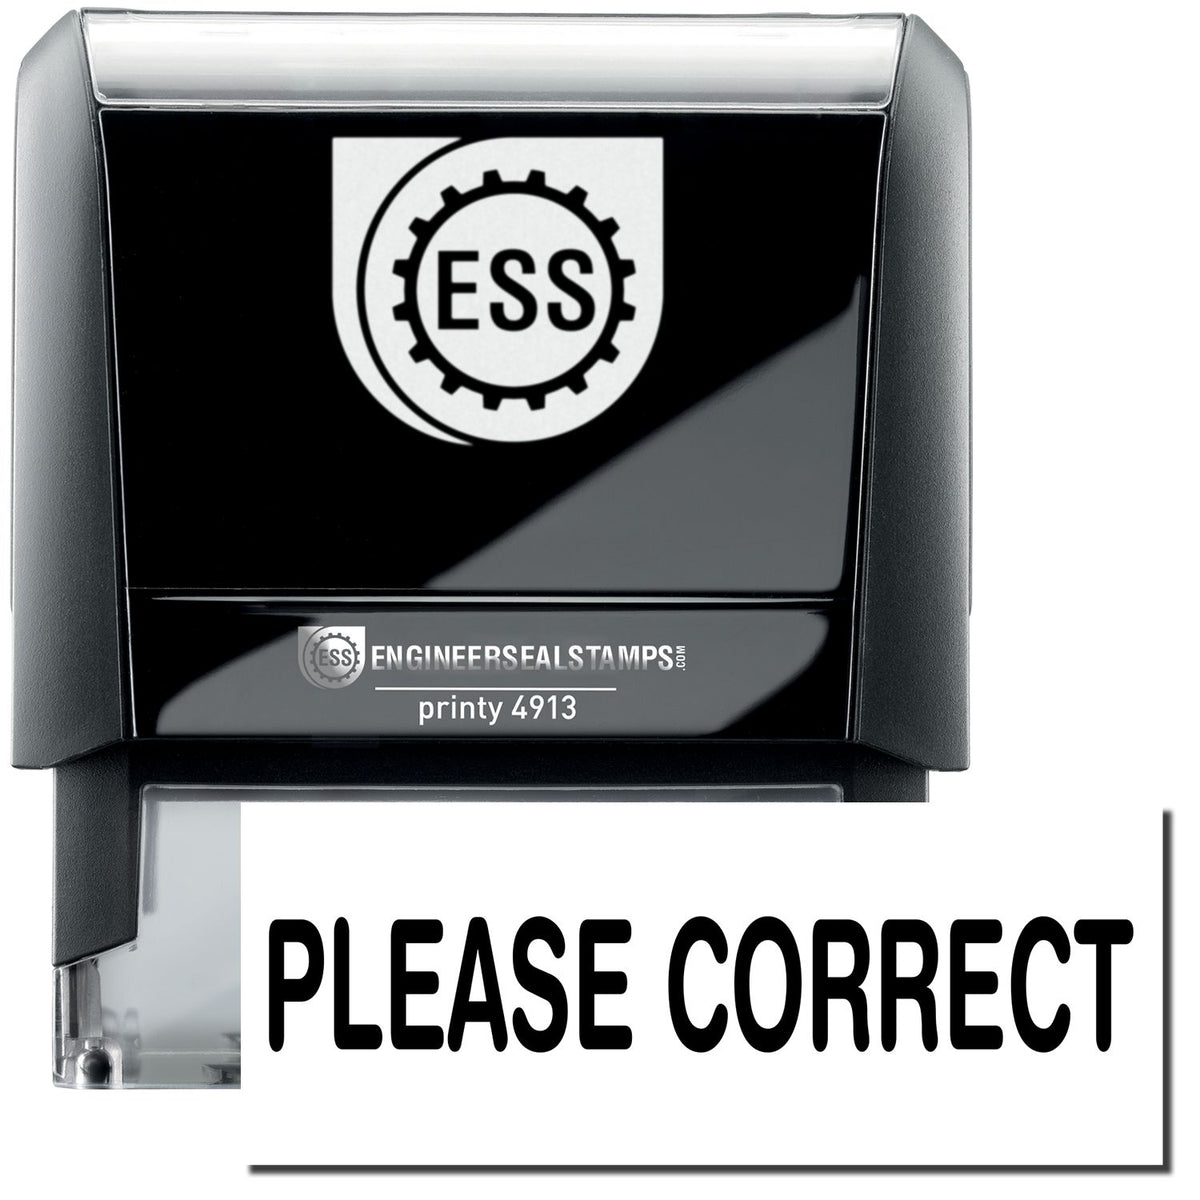 A self-inking stamp with a stamped image showing how the text &quot;PLEASE CORRECT&quot; in a large bold font is displayed by it.